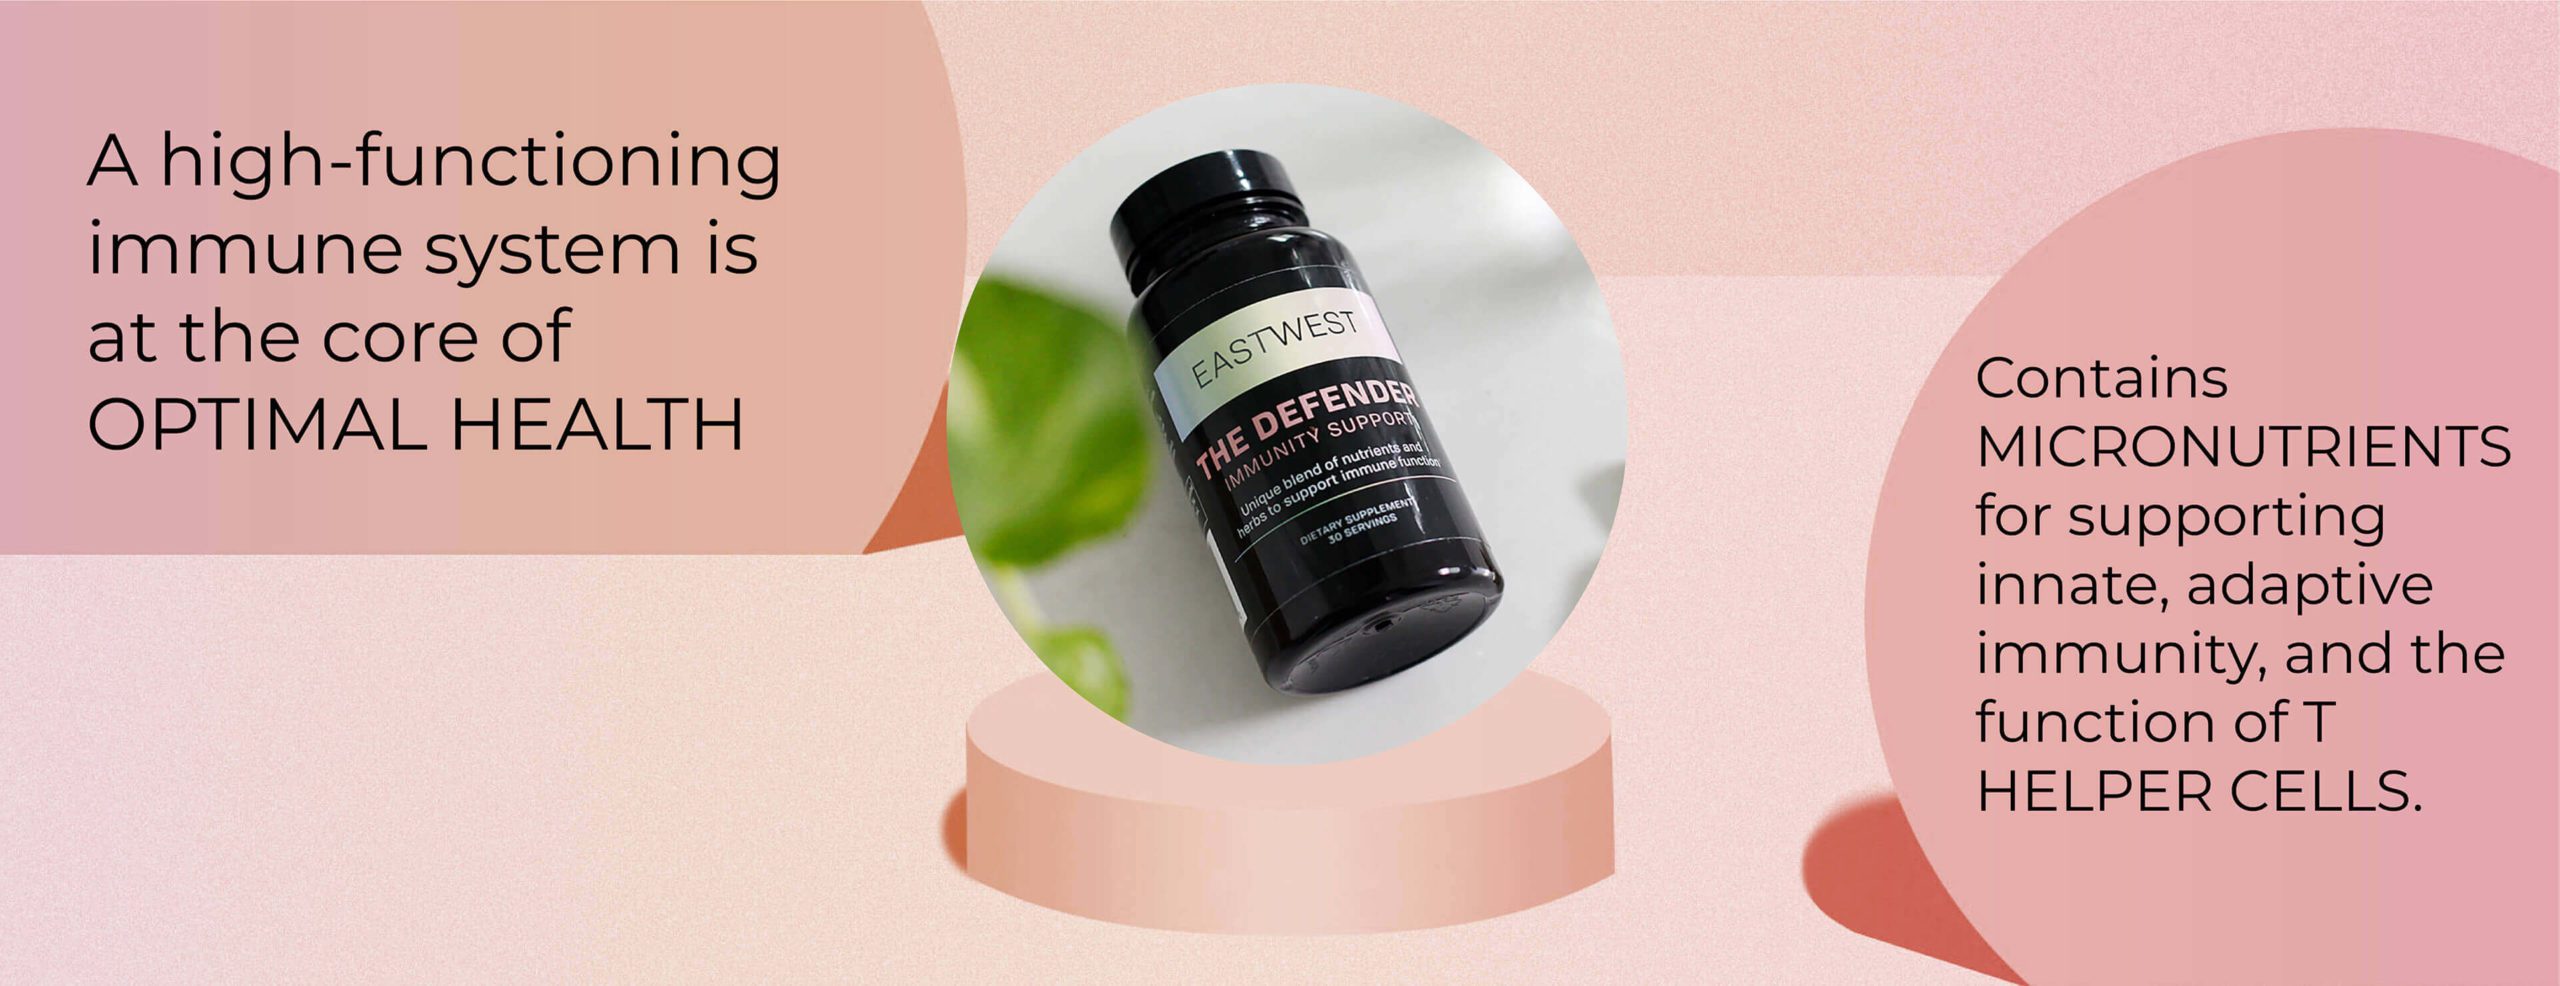 The Defender - East West Way. A high-functioning immune system is at the core of optimal health. Contains micronutrients for supporting innate, adaptive immunity, and the function of t-helper cells.